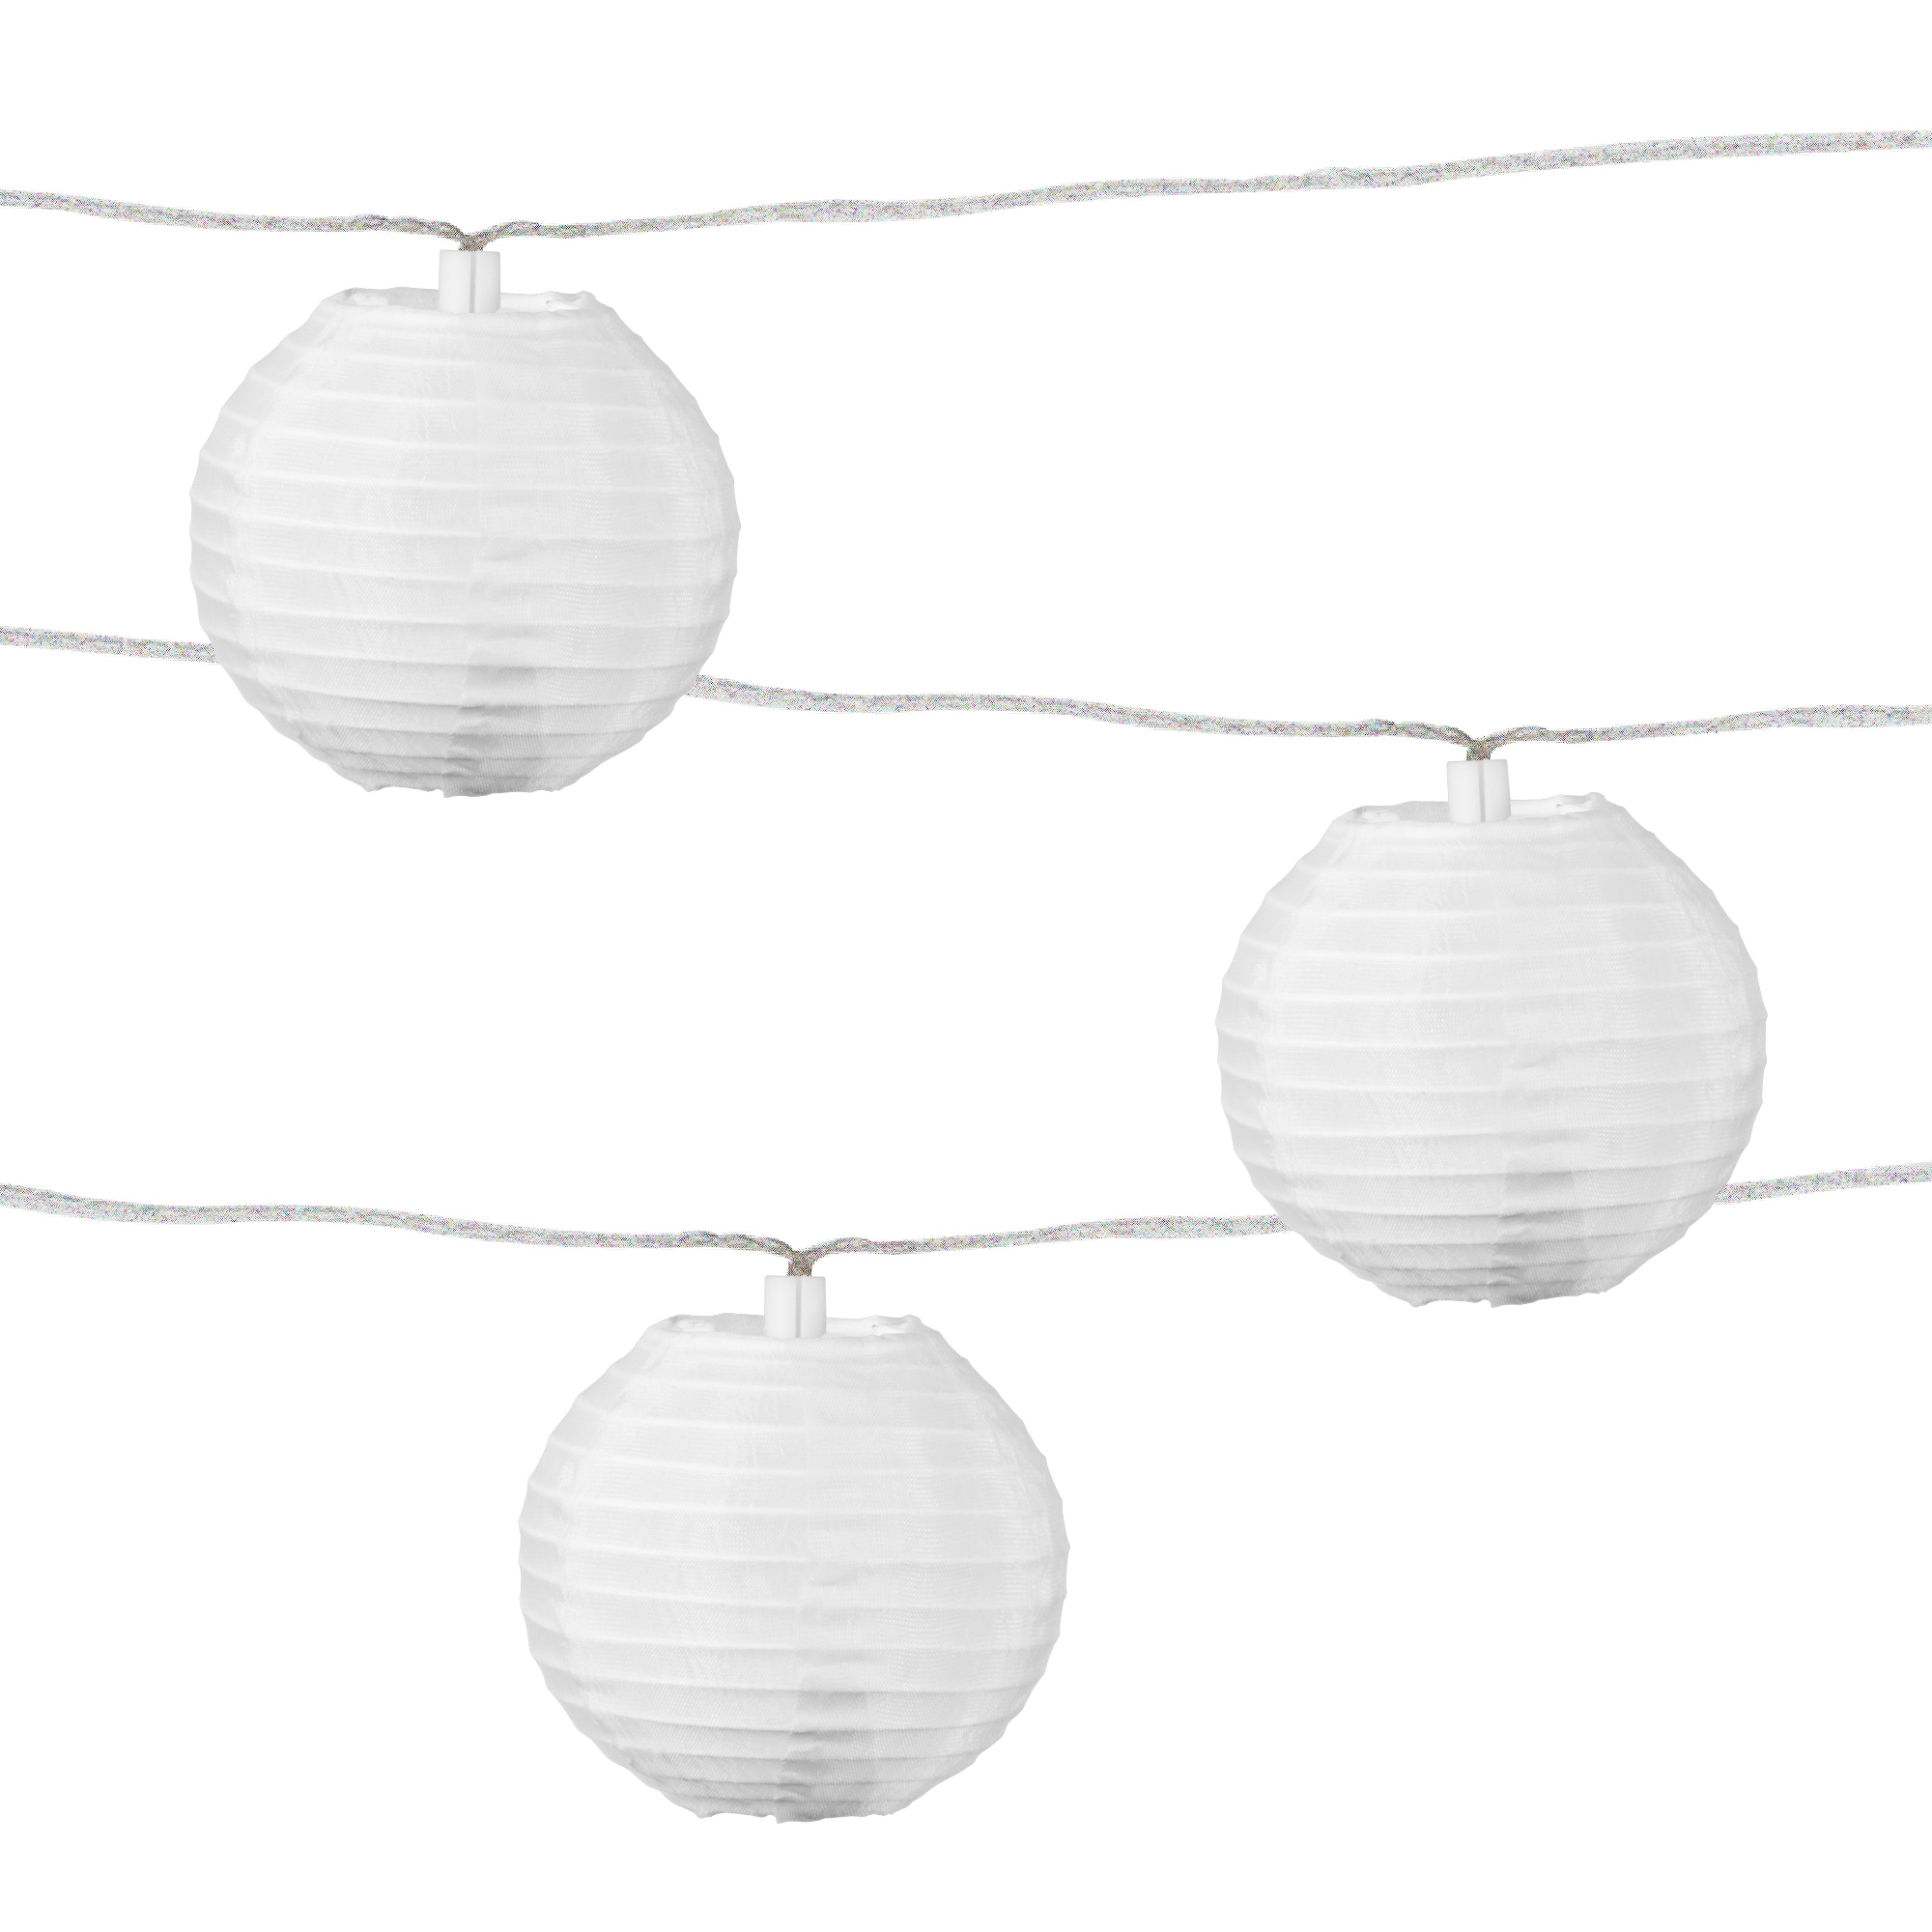 Allsop Home and Garden, GLOW Solar String Lights - White (10 PC), Color White, Included (qty.) 1 Model 32049